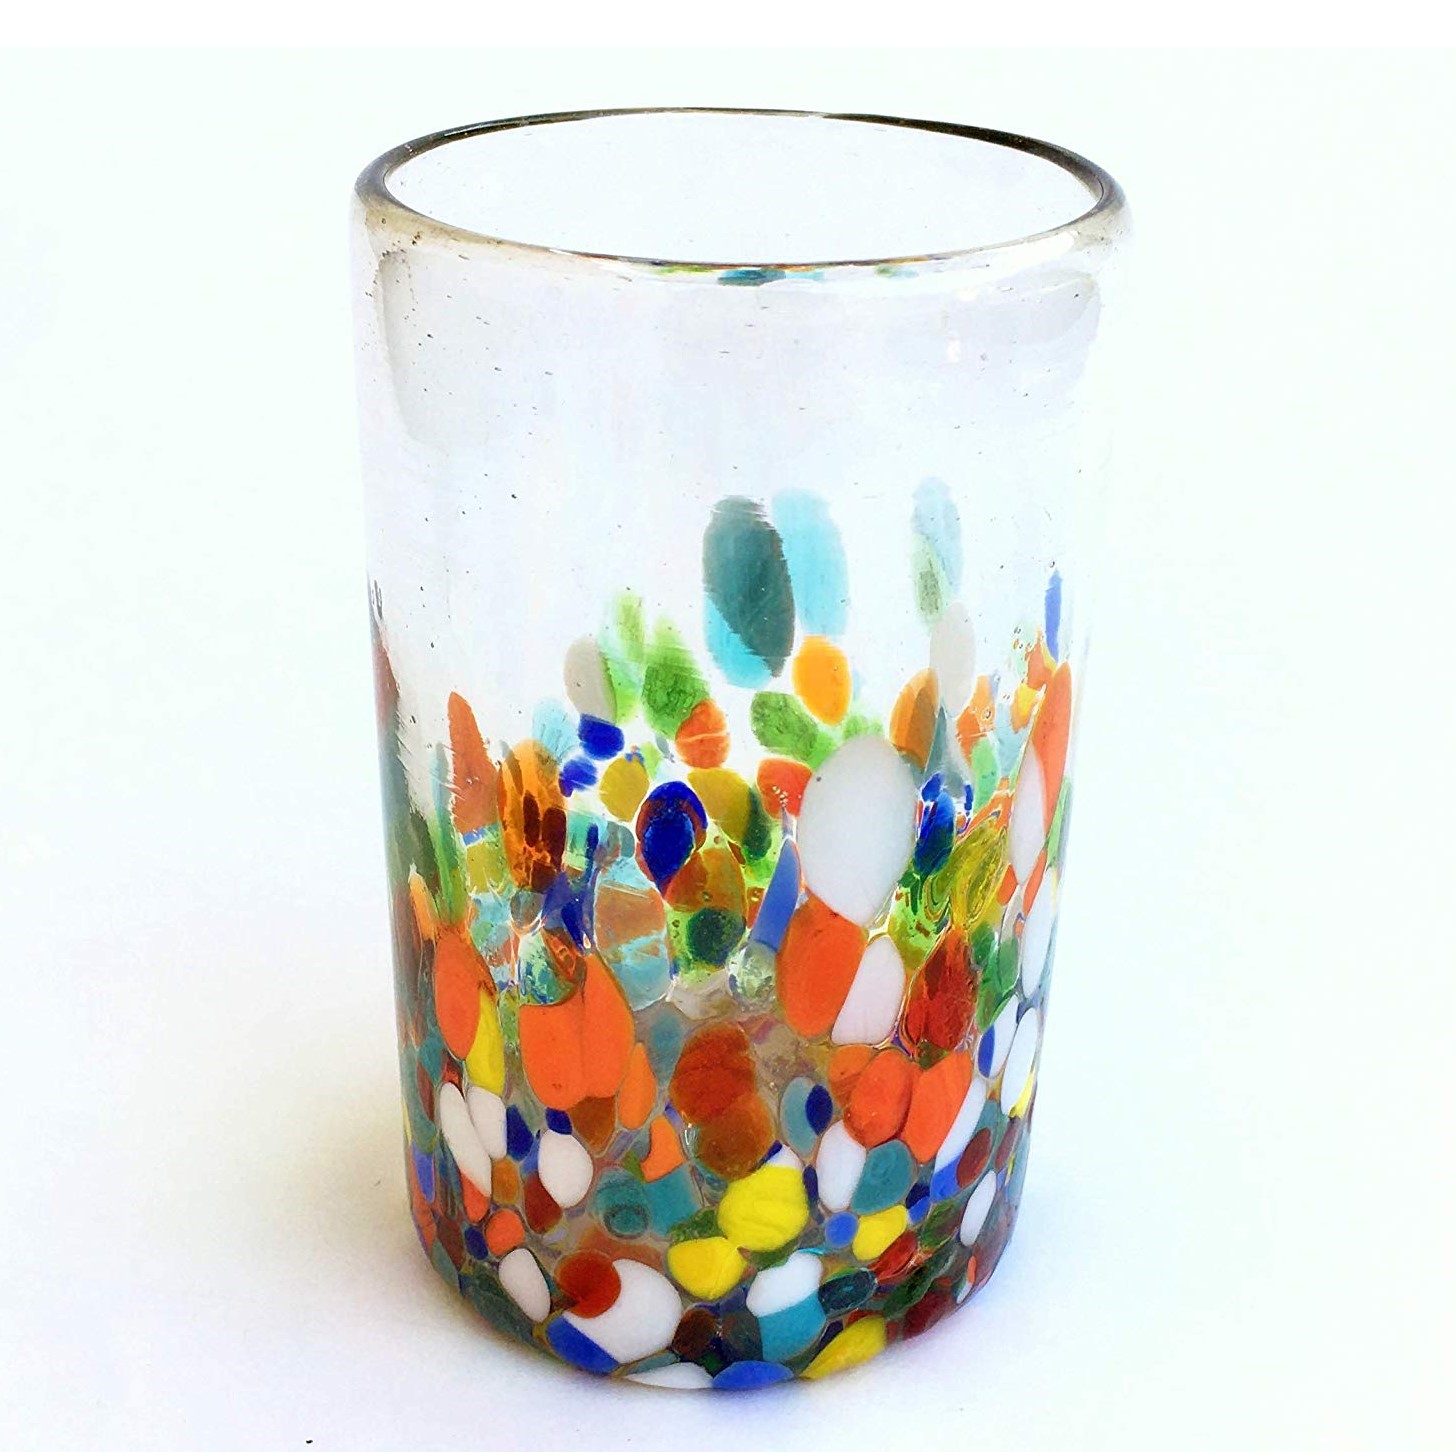 MEXICAN GLASSWARE / Clear & Confetti 14 oz Drinking Glasses (set of 6) / Our Clear & Confetti drinking glasses combine the best of two worlds: clear, thick, sturdy handcrafted glass on top, meets the colorful, festive, confetti bottom! These glasses will sure be a standout in any table setting or as a fabulous gift for your loved ones. Crafted one by one by skilled artisans in Tonala, Mexico, each glass is different from the next making them unique works of art. You'll be amazed at how they make having a simple glass of water a happier experience. Each glass holds approximately 14 oz of liquid and stands a bit over 5